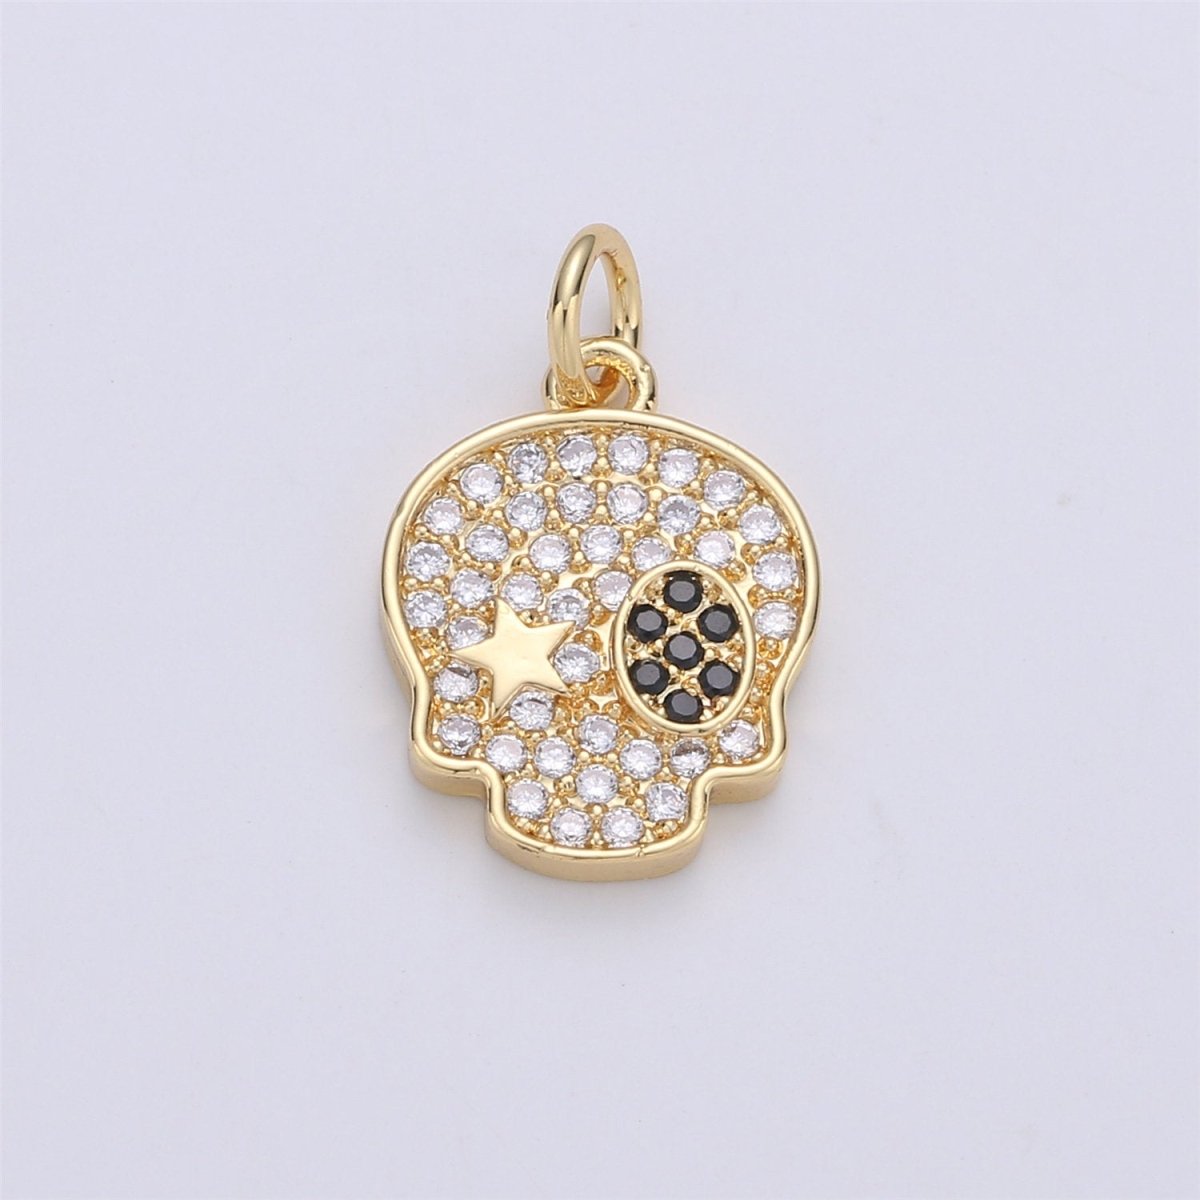 14K Gold Filled Micro Pave Dainty Skull Charm, Cute Rock Star Skull charm, Cubic skull jewelry for Necklace Earring Bracelet Component, C-897 - DLUXCA